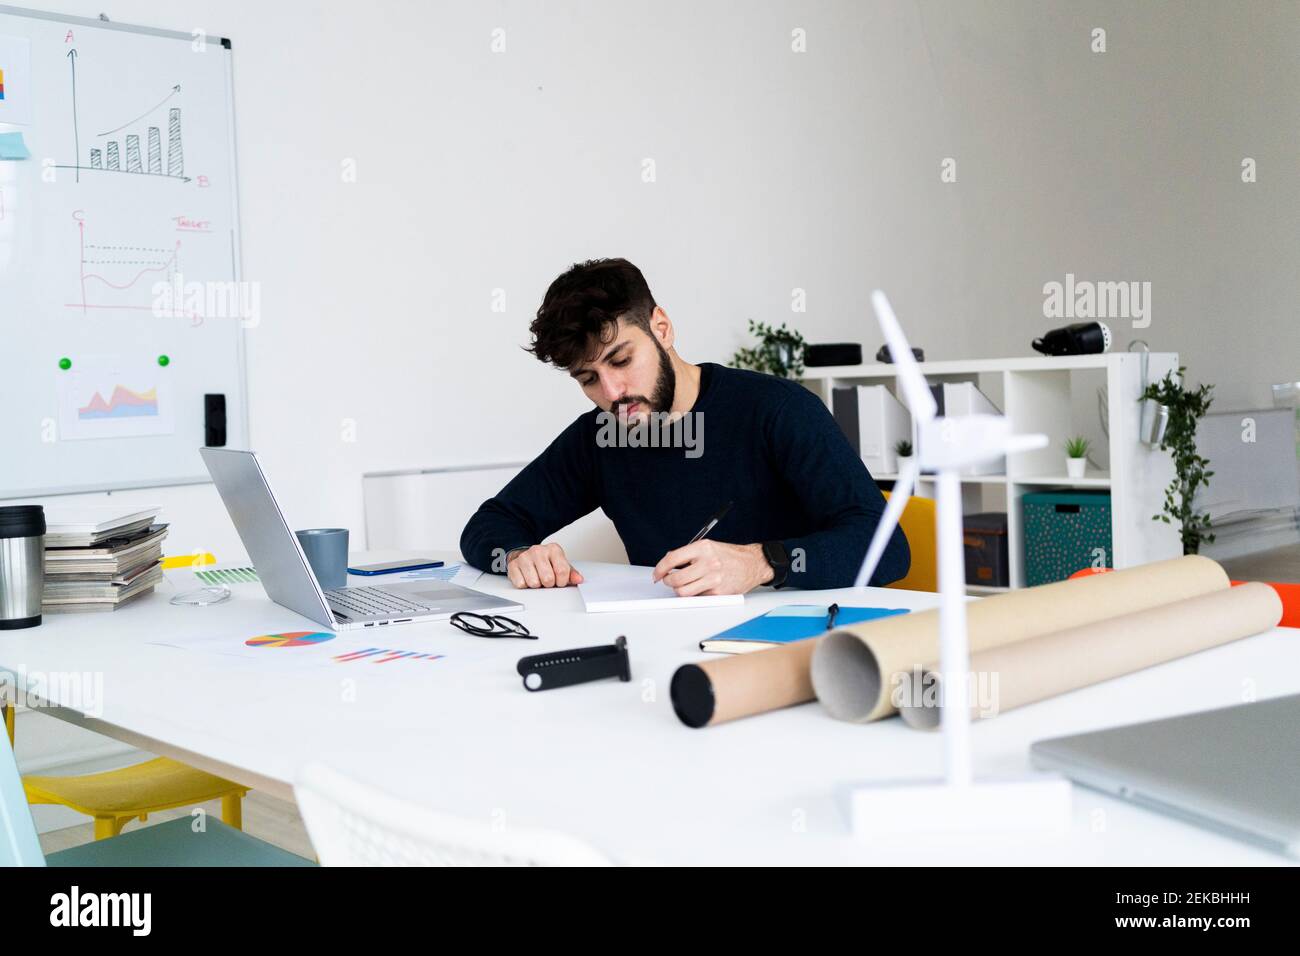 Young businessman writing at desk in creative office Stock Photo